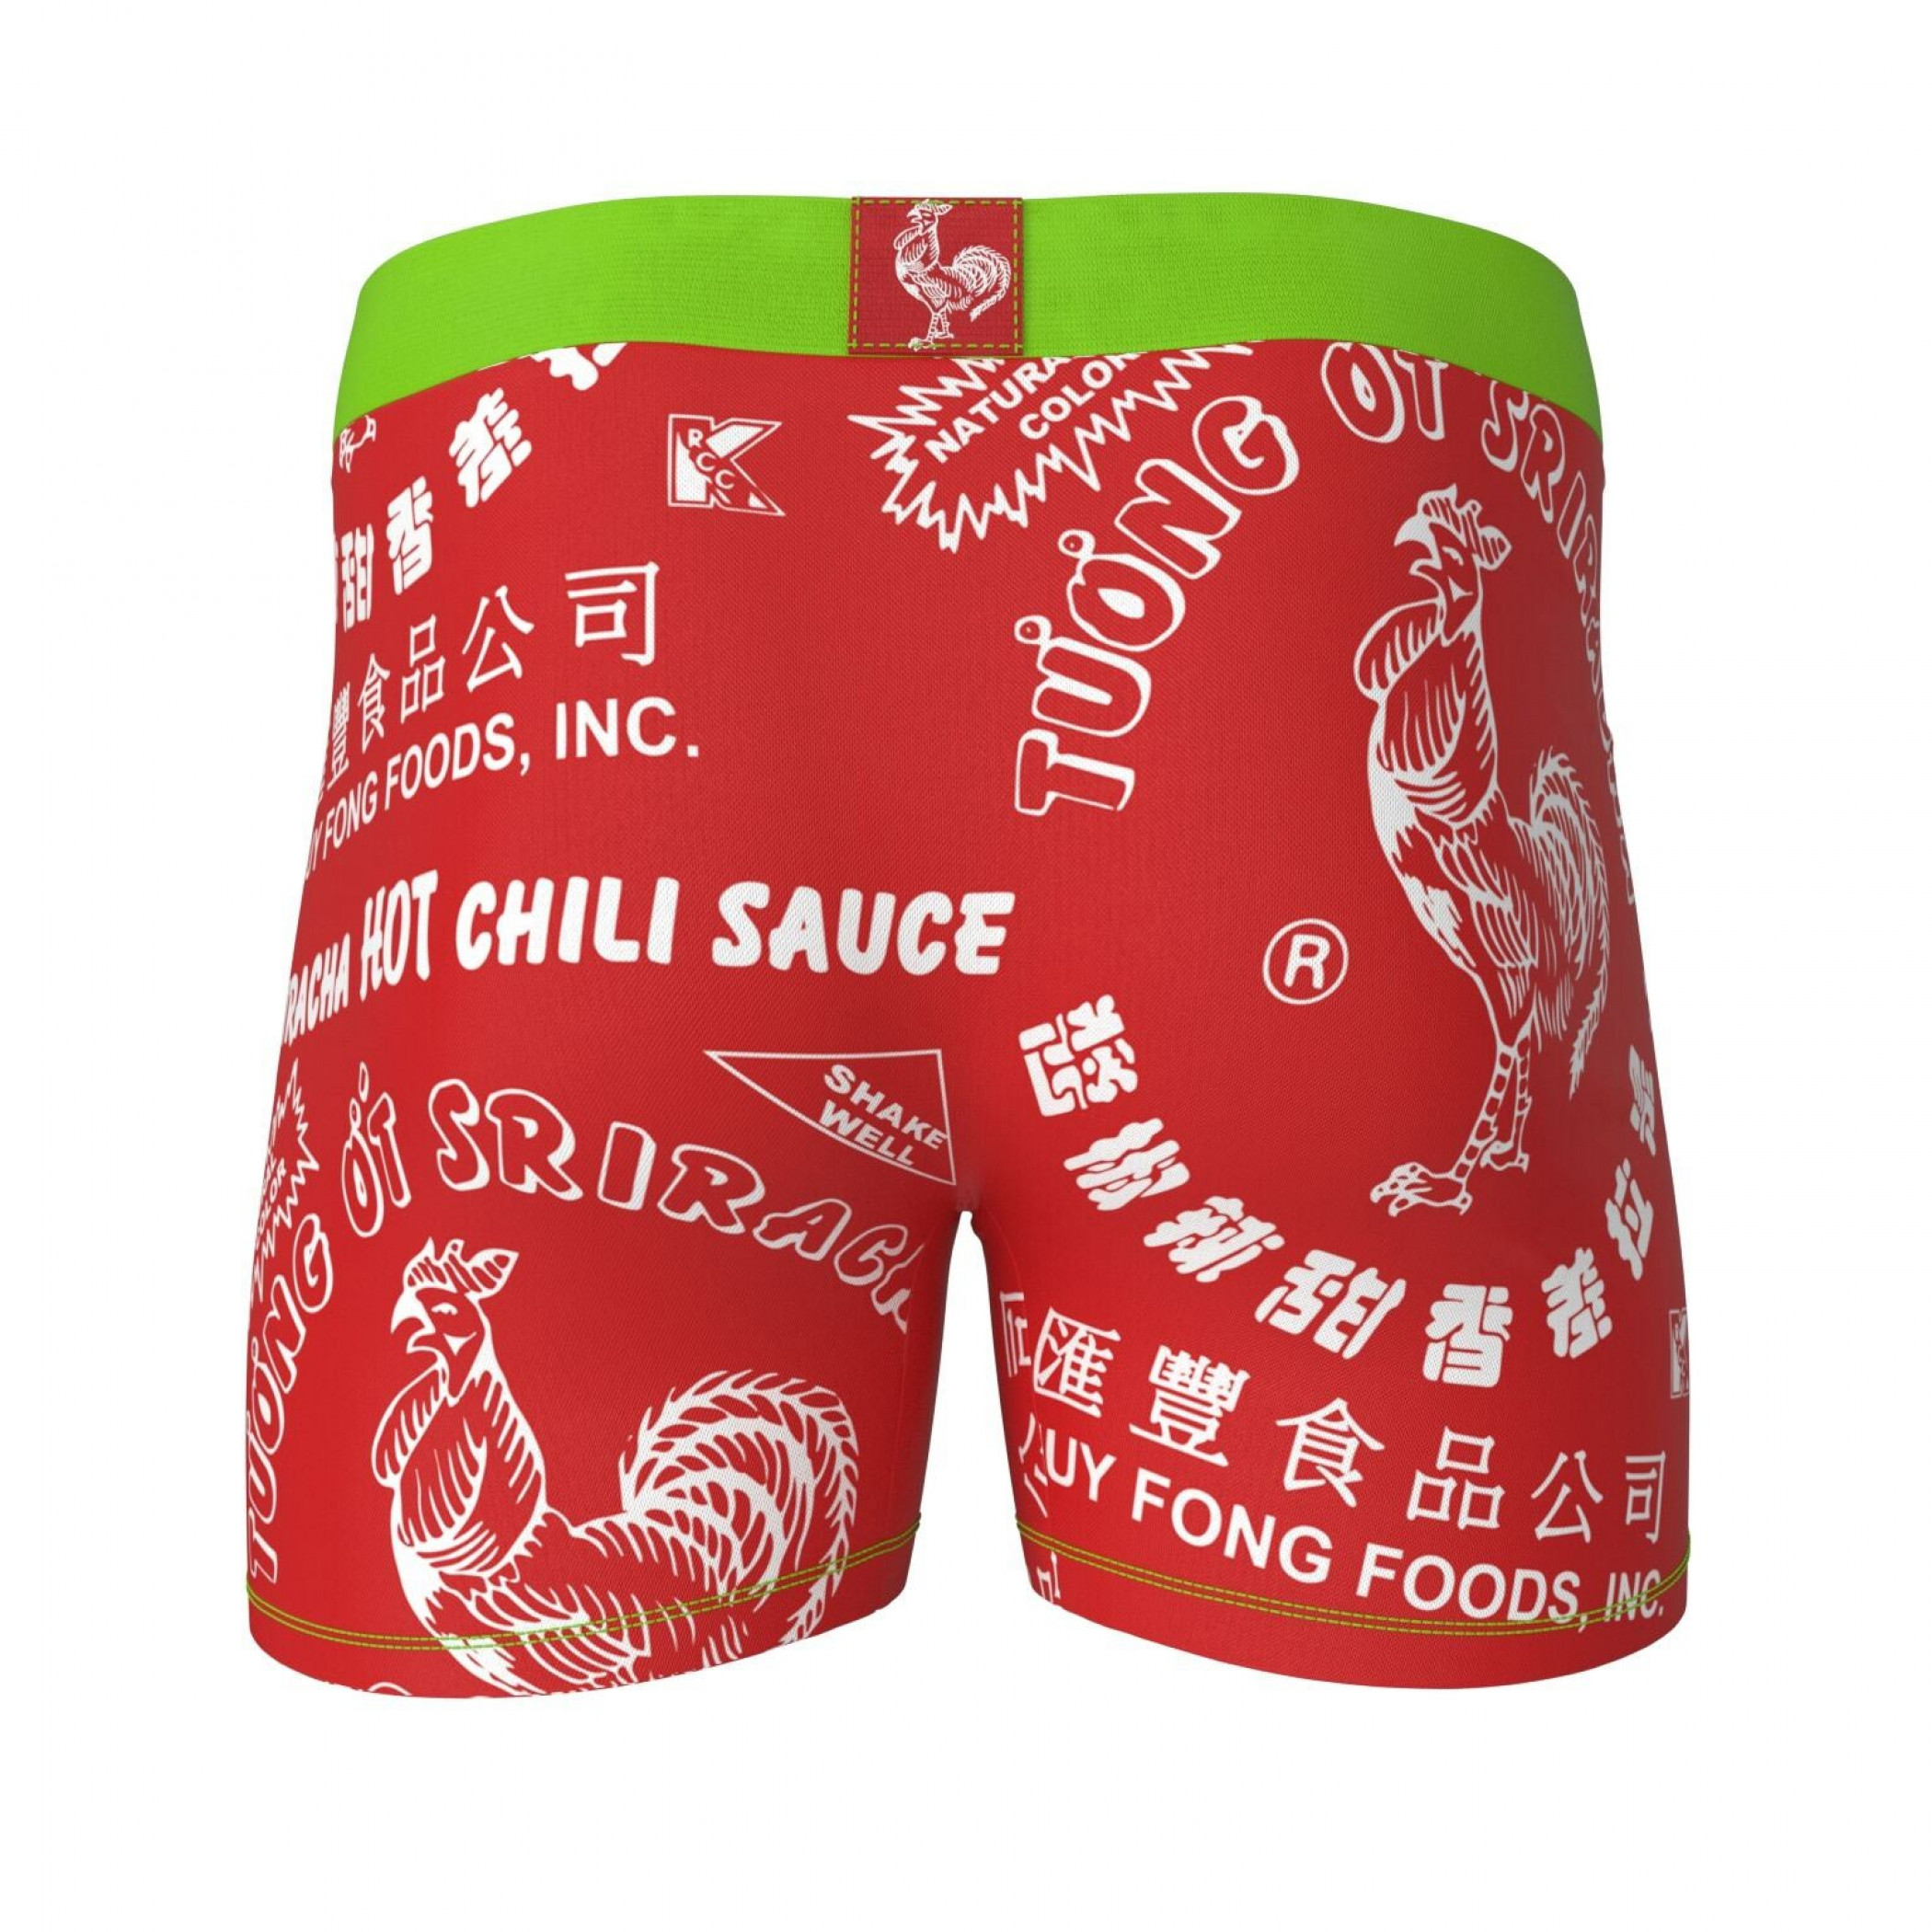 Sriracha Hot Chili Sauce Boxer Briefs in Chinese Take Out Container-XLarge - image 6 of 6